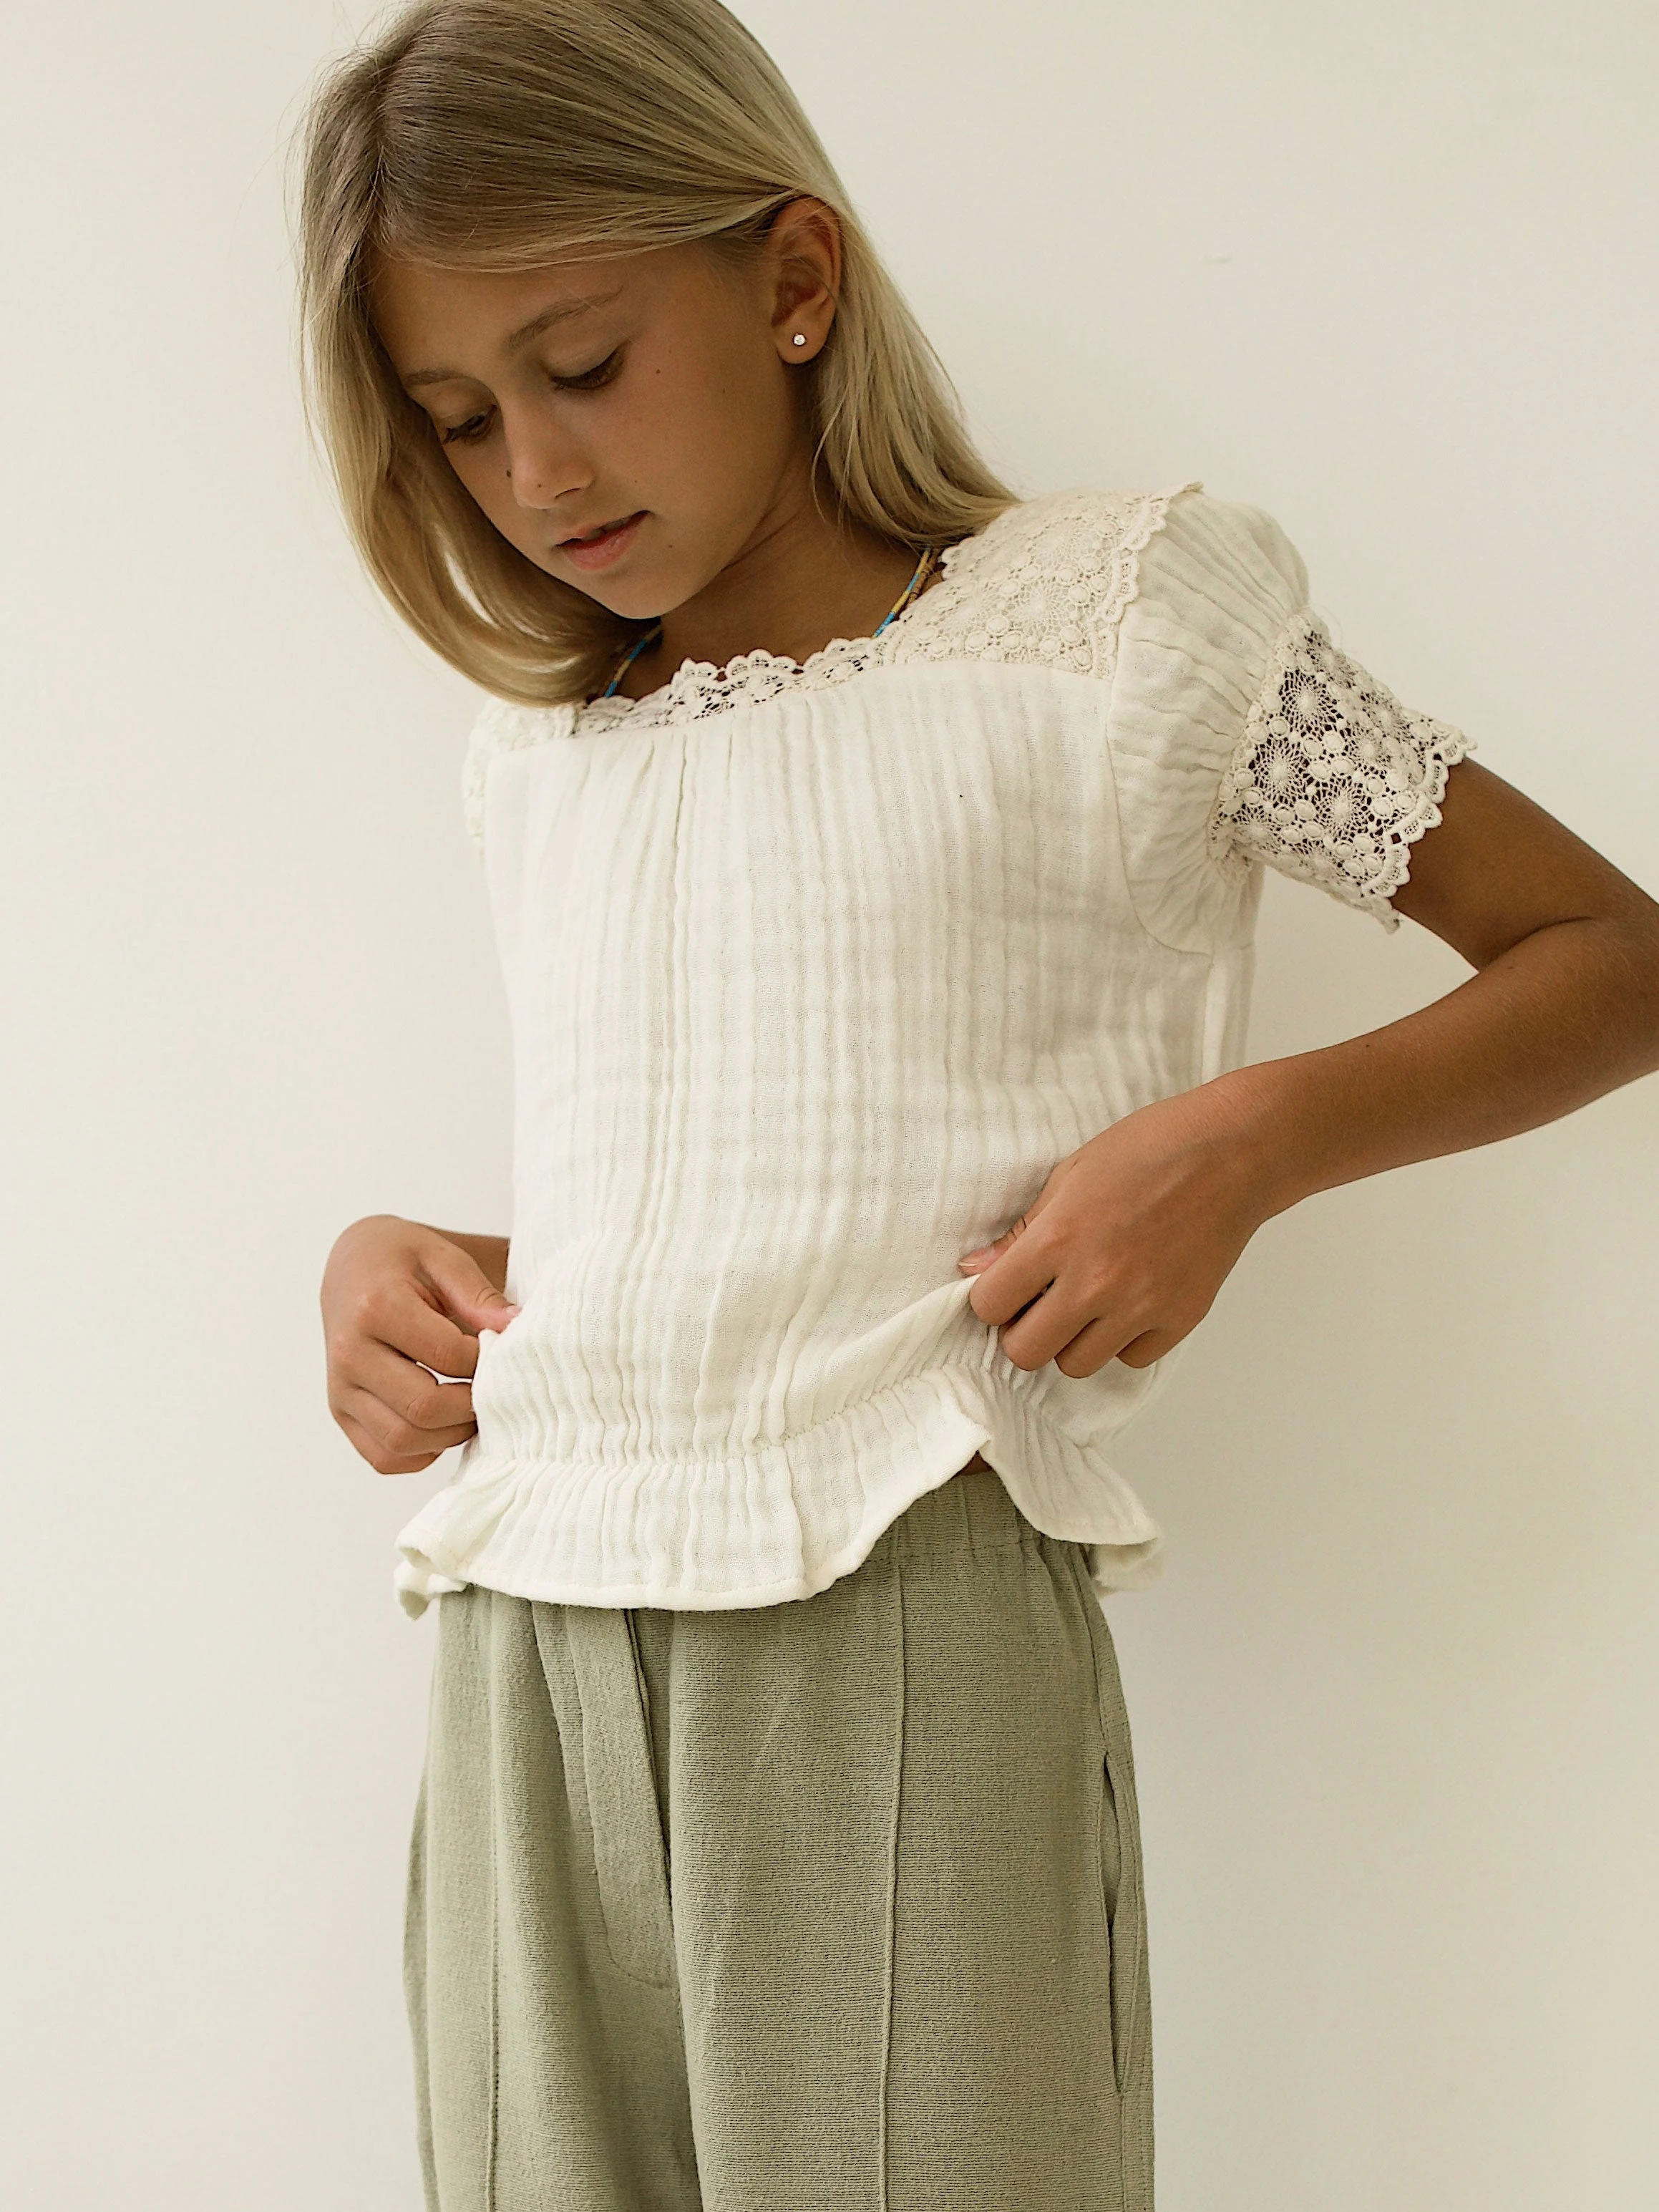 Custom double layer organic cotton gauze muslin kids girls tops with lace trim white girl's blouses&shirts for children